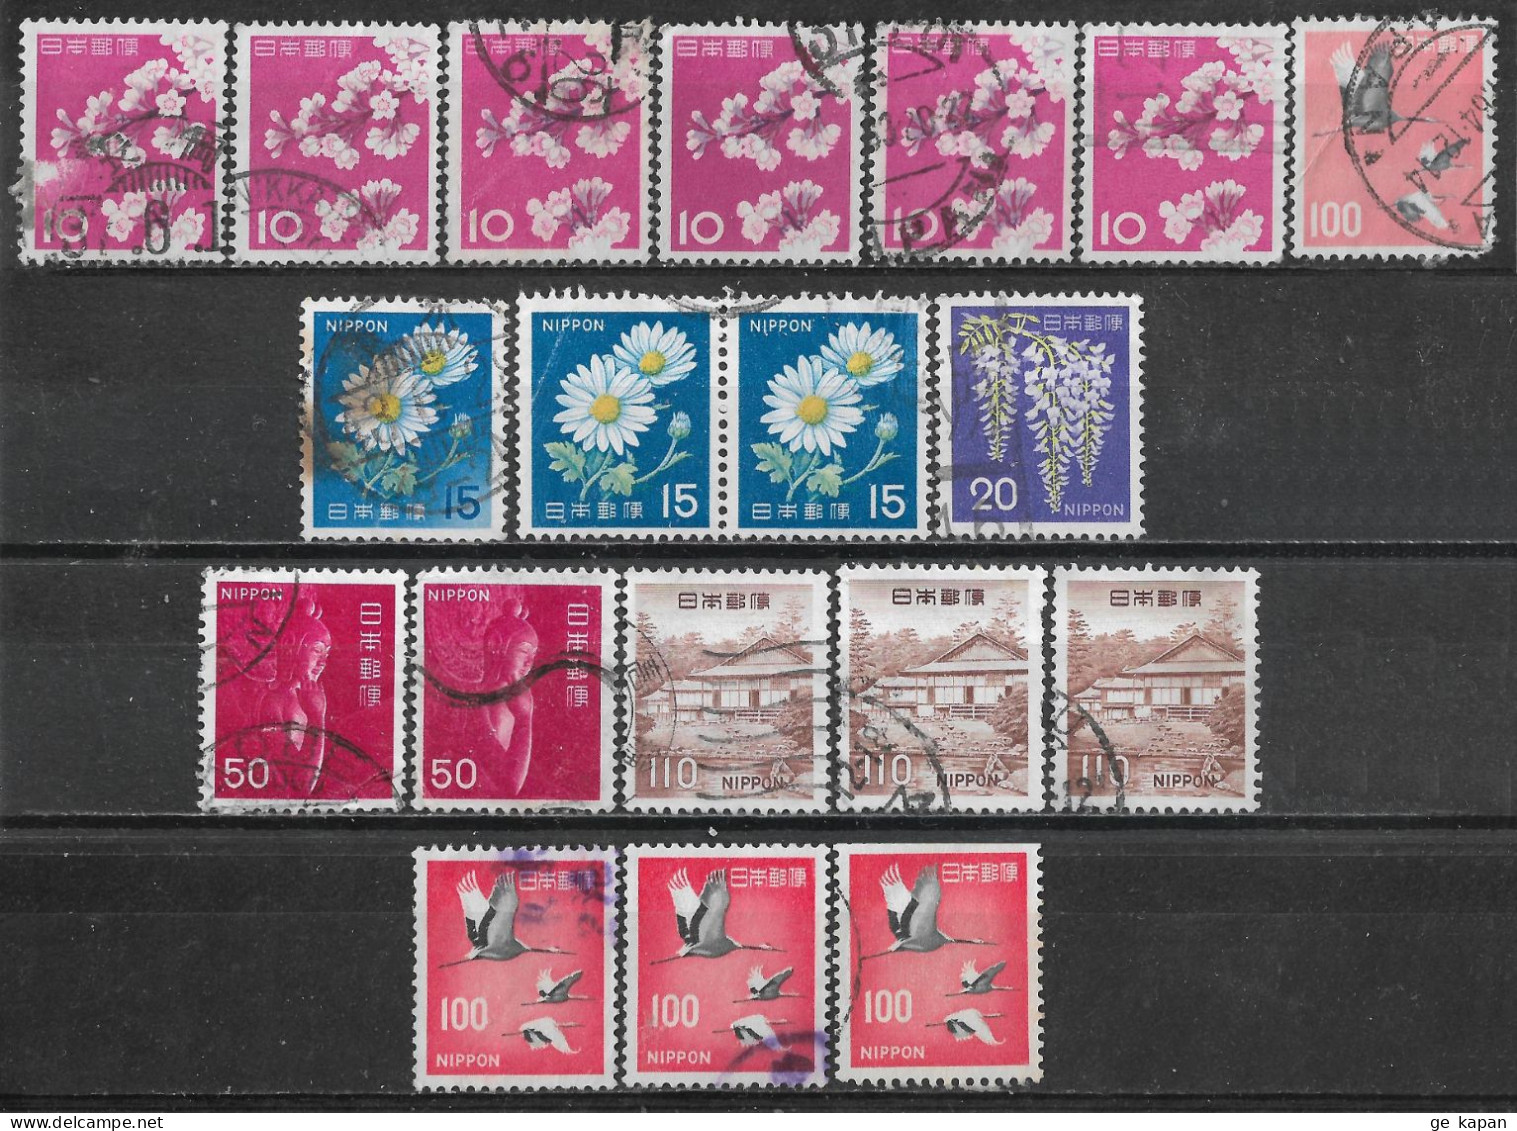 1961-1968 JAPAN Set Of 19 Used Stamps (Michel # 758A,764,930A,931A,932,937,943,1007A) CV €4.70 - Gebraucht